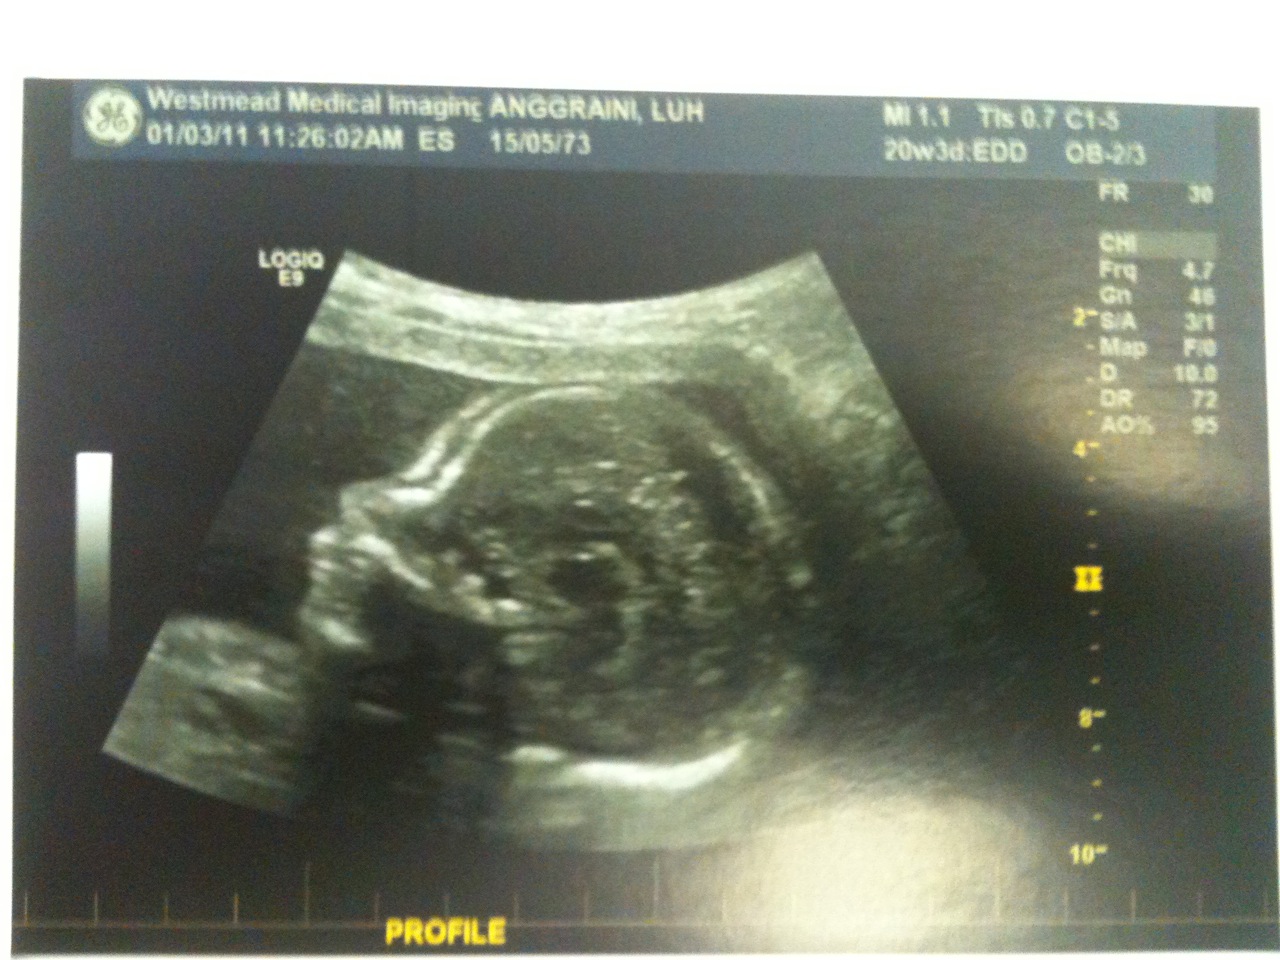 Ultrasound Pictures A Son In My Family